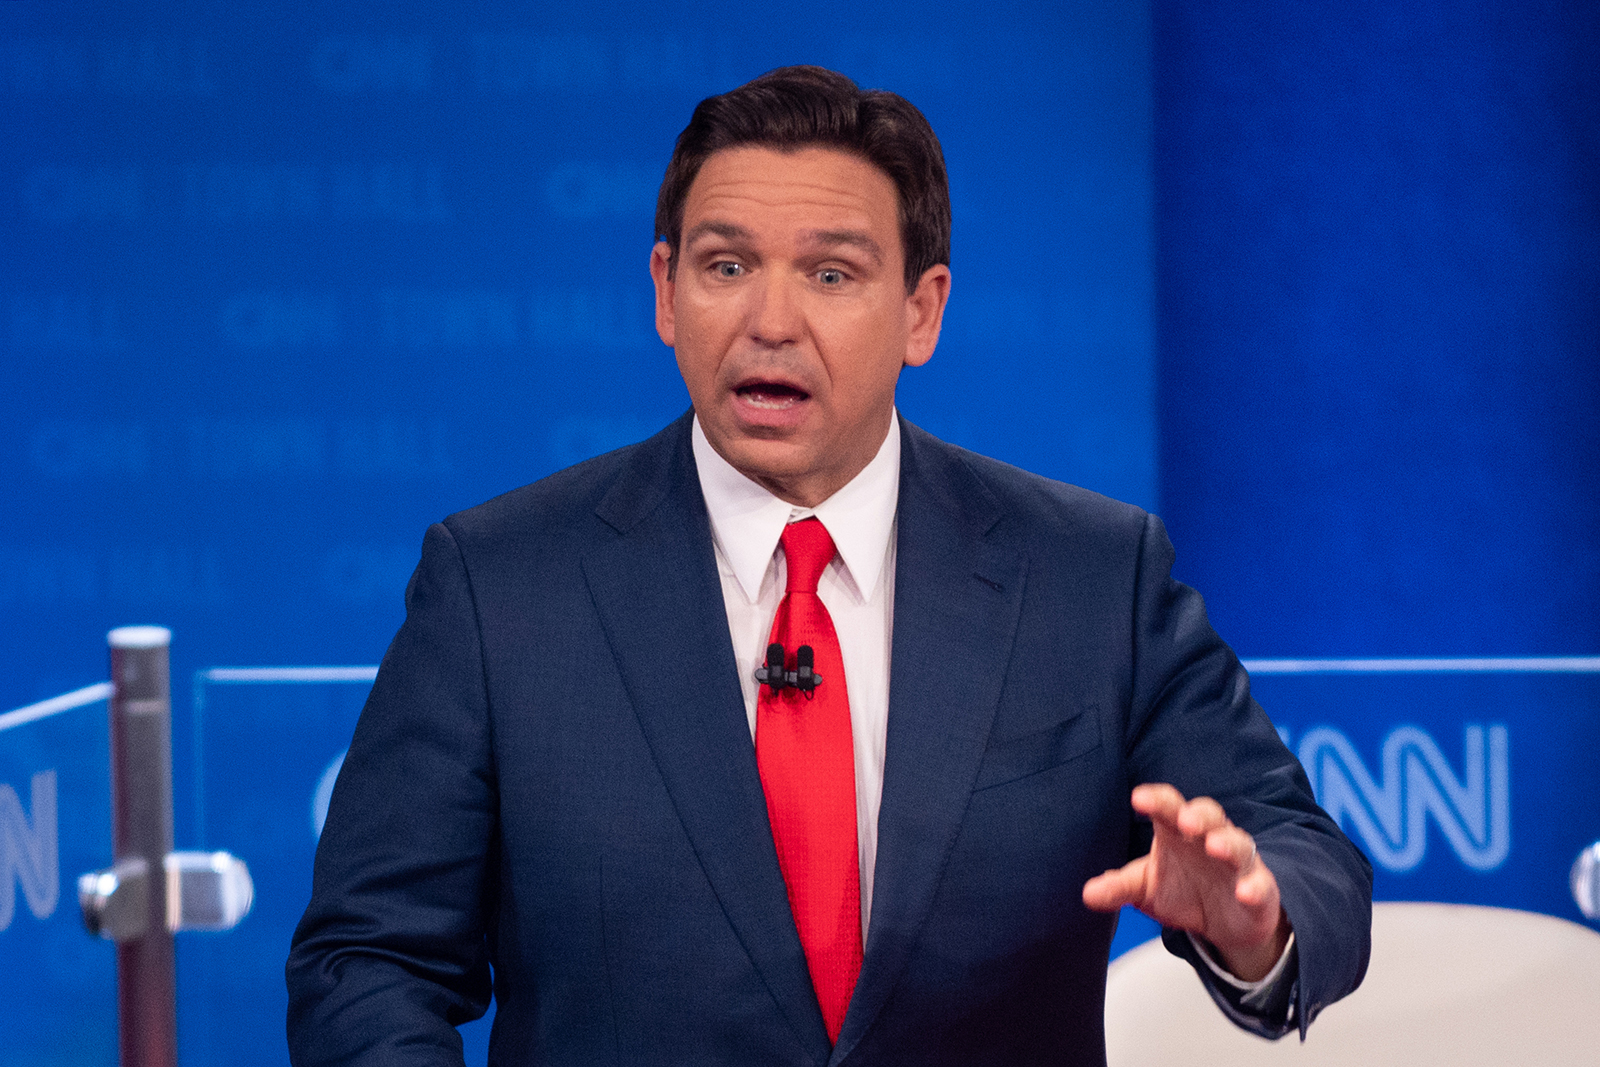 DeSantis participates in a CNN Republican Town Hall moderated by CNN’s Jake Tapper at Grand View University in Des Moines, Iowa, on Tuesday.